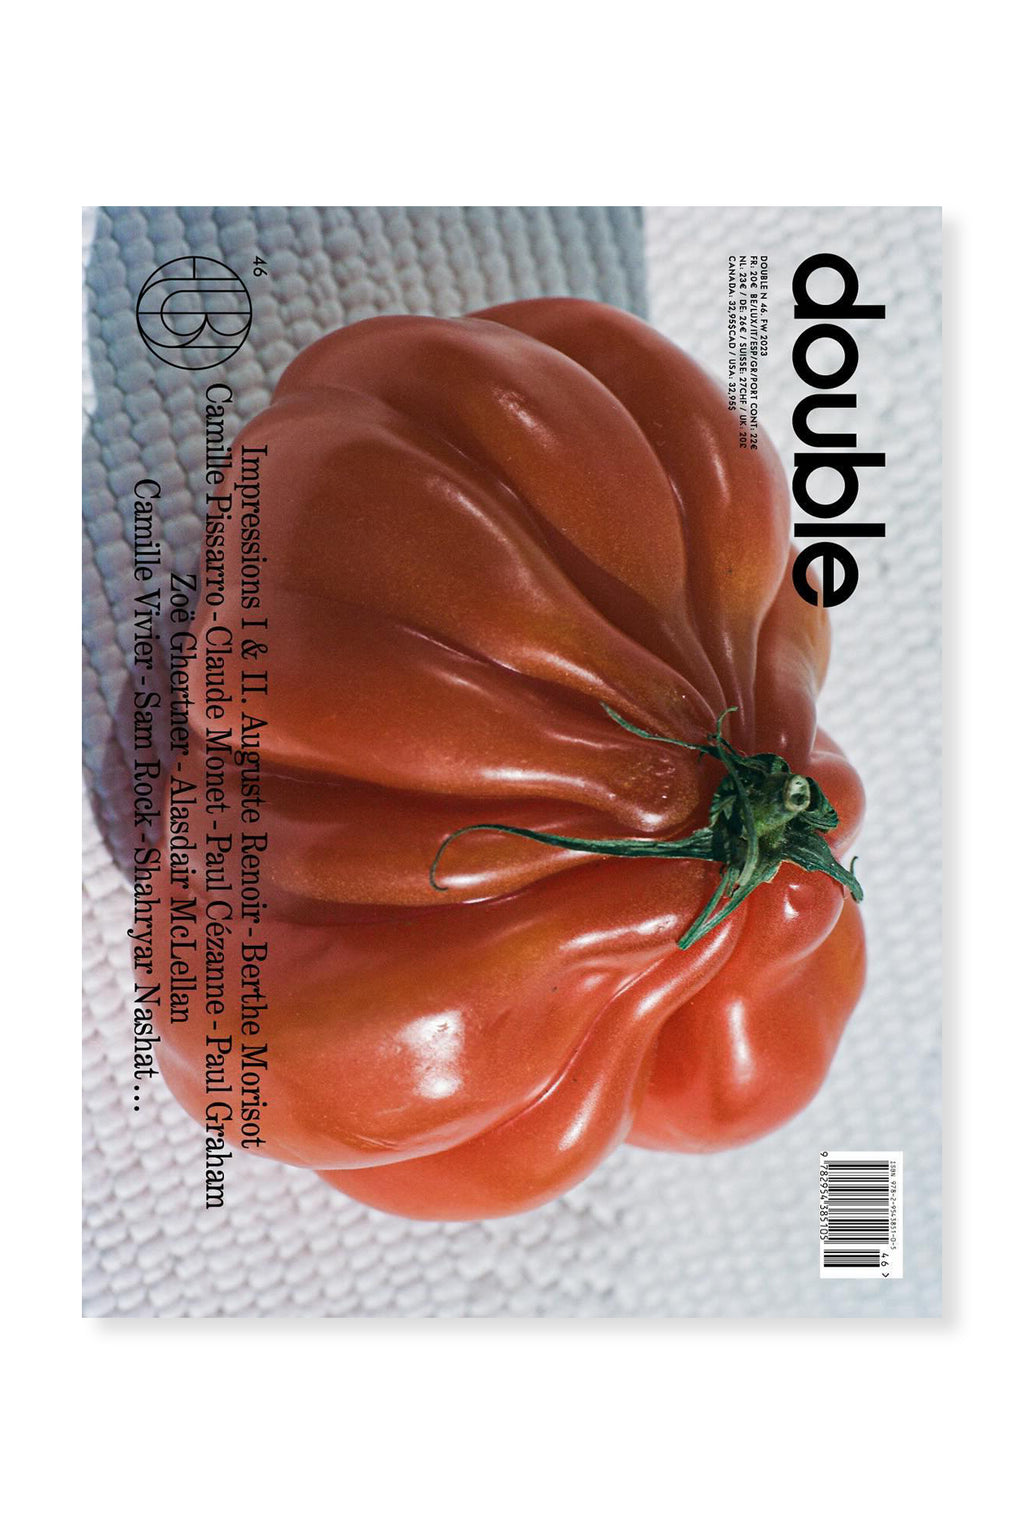 Double, Issue 46